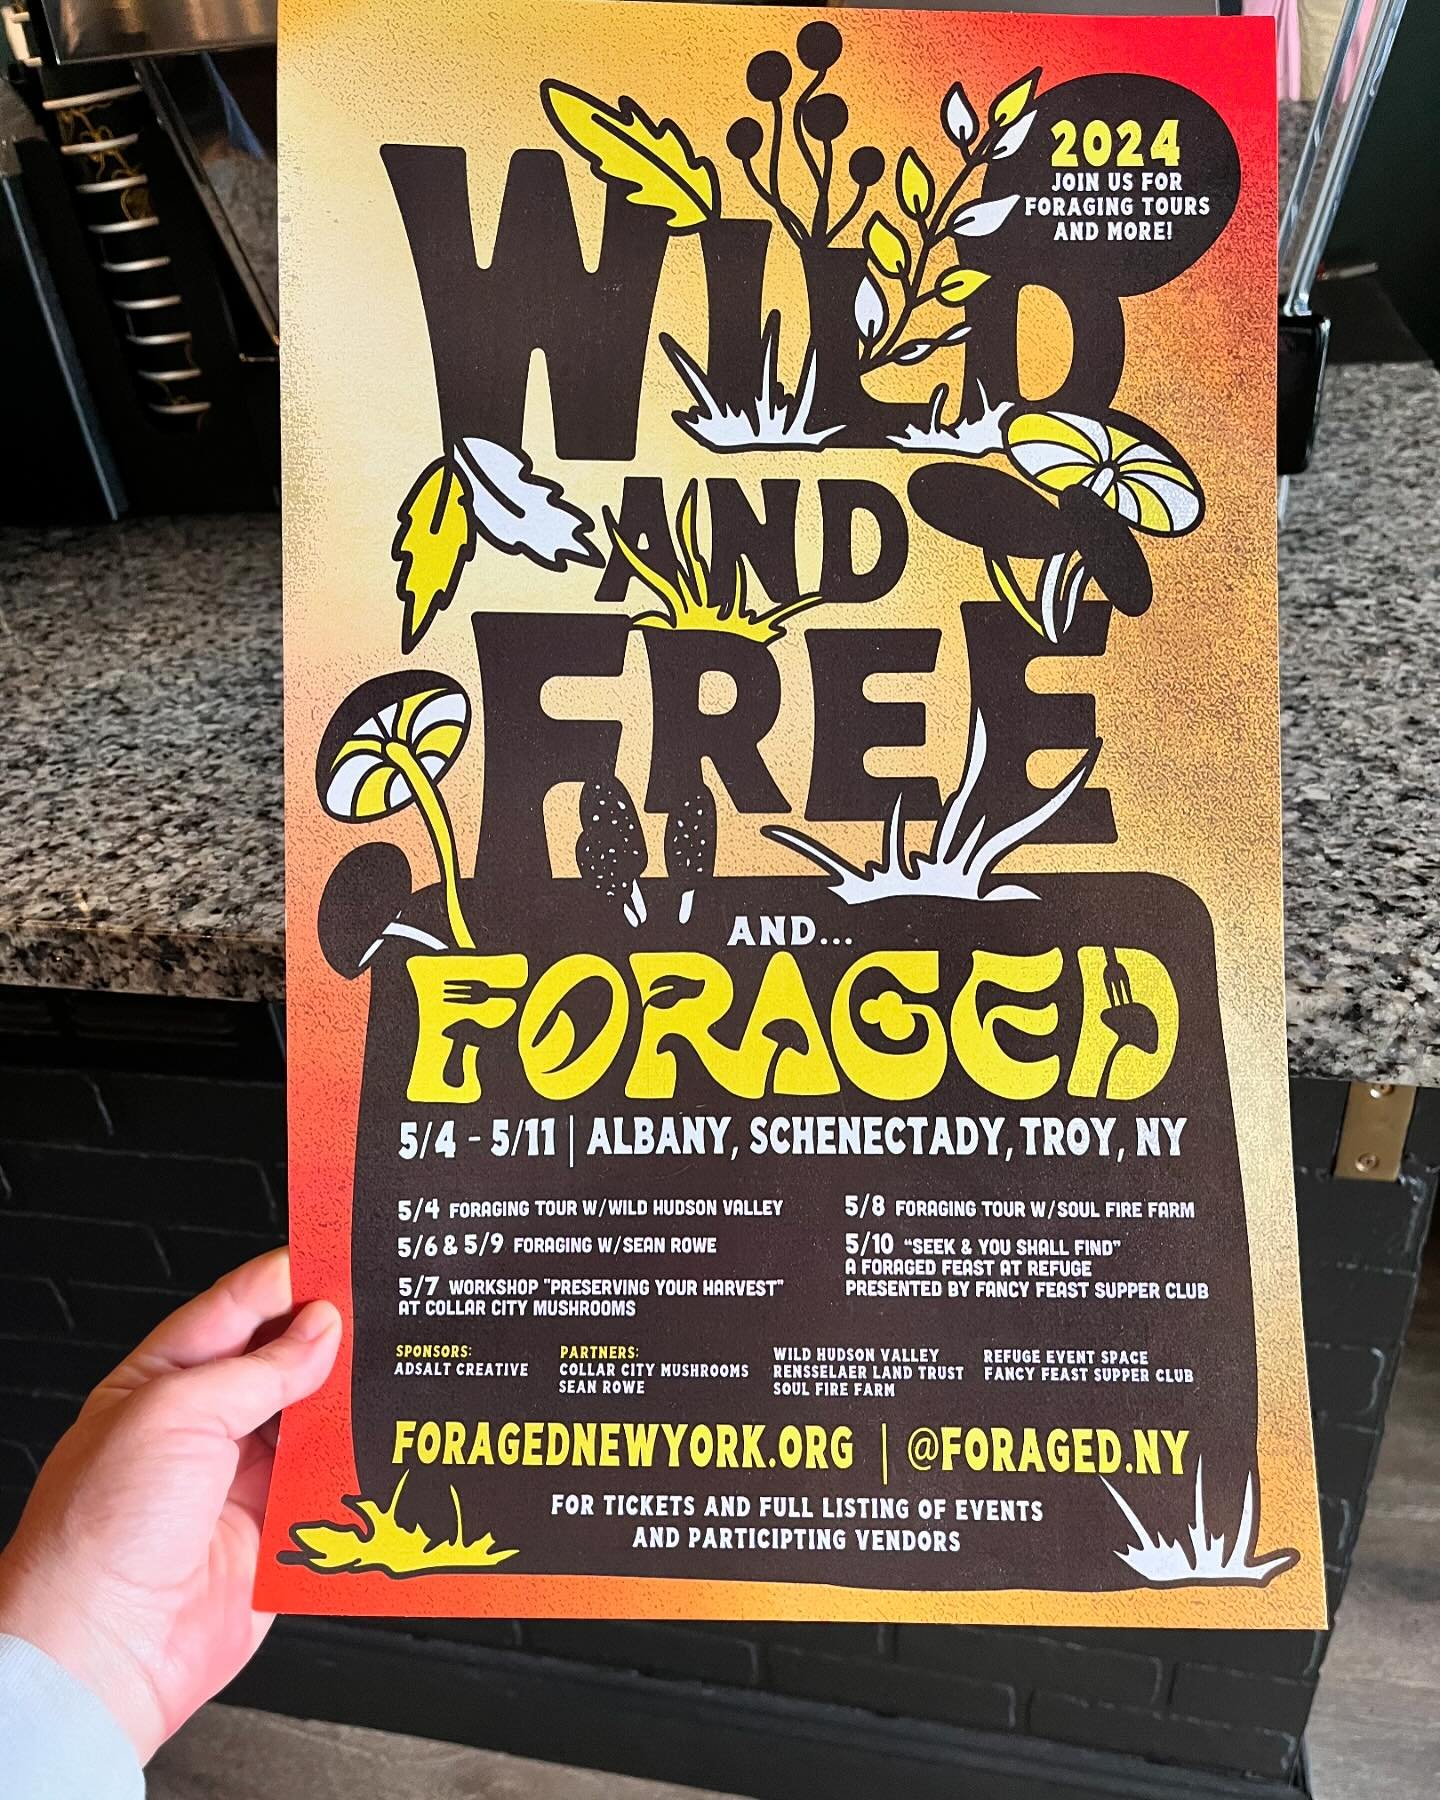 Fancy Feast Supper Club is making its debut in Troy on Friday May 10th!

Seek &amp; You Shall Find, A Foraged Feast at Refuge
is part of this years#&rsquo;s Foraged New York (@foraged.ny), Wild &amp; Free &amp; Foraged food festival

Join us for this